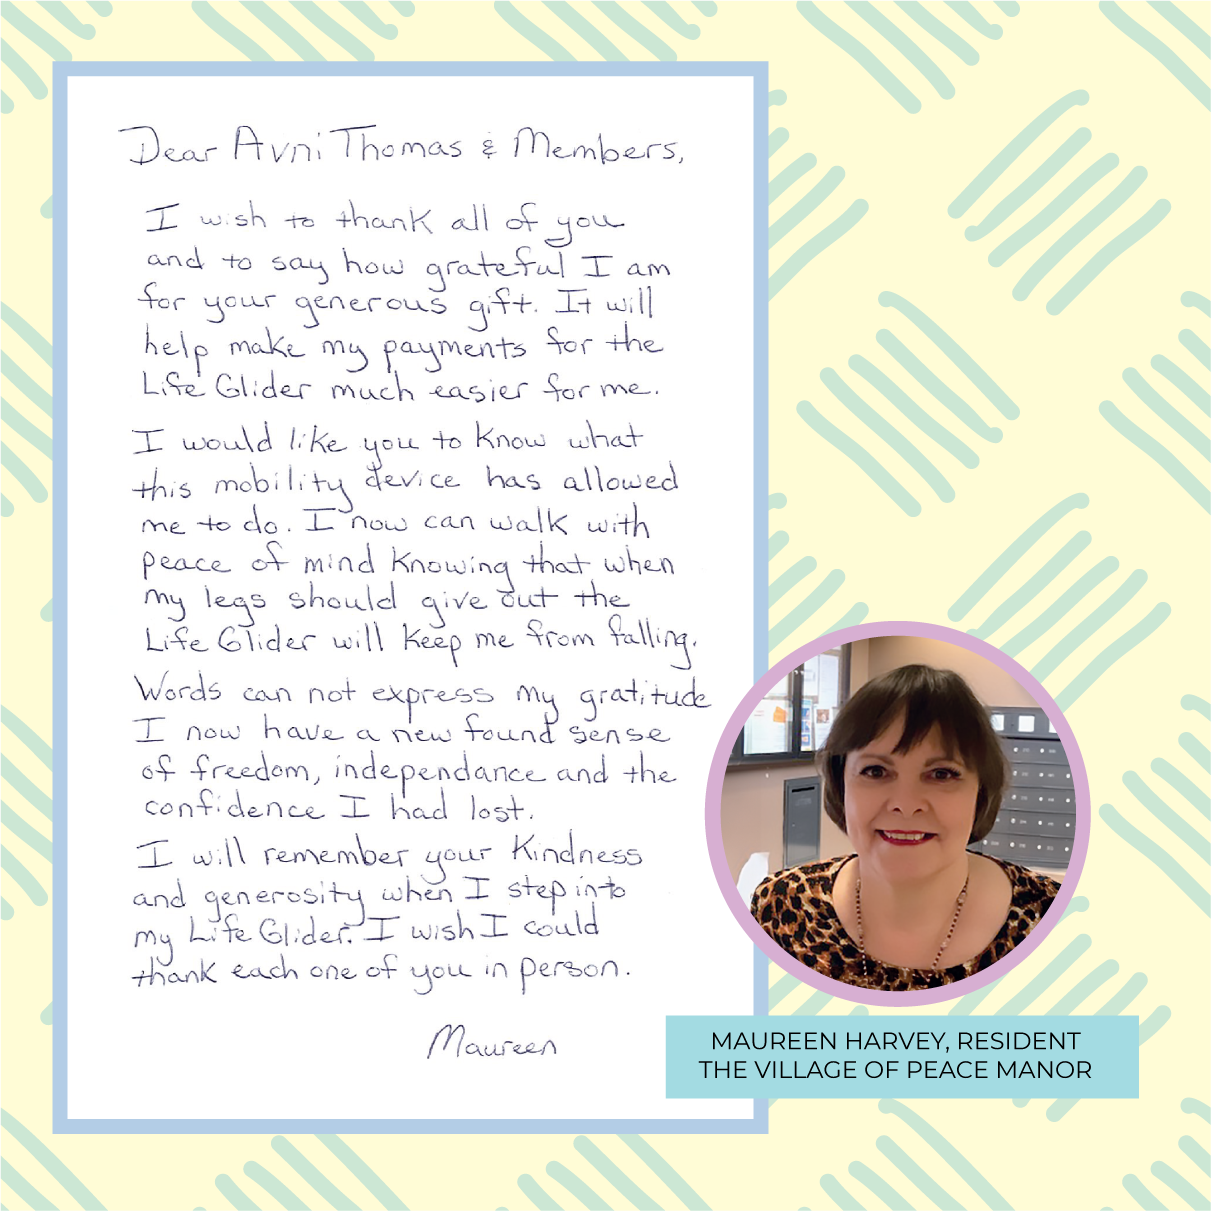 A thank you note from Maureen Harvey, a resident at the Village of Peace Manor, thanking donors for financial aid for her Life Glider mobility device.